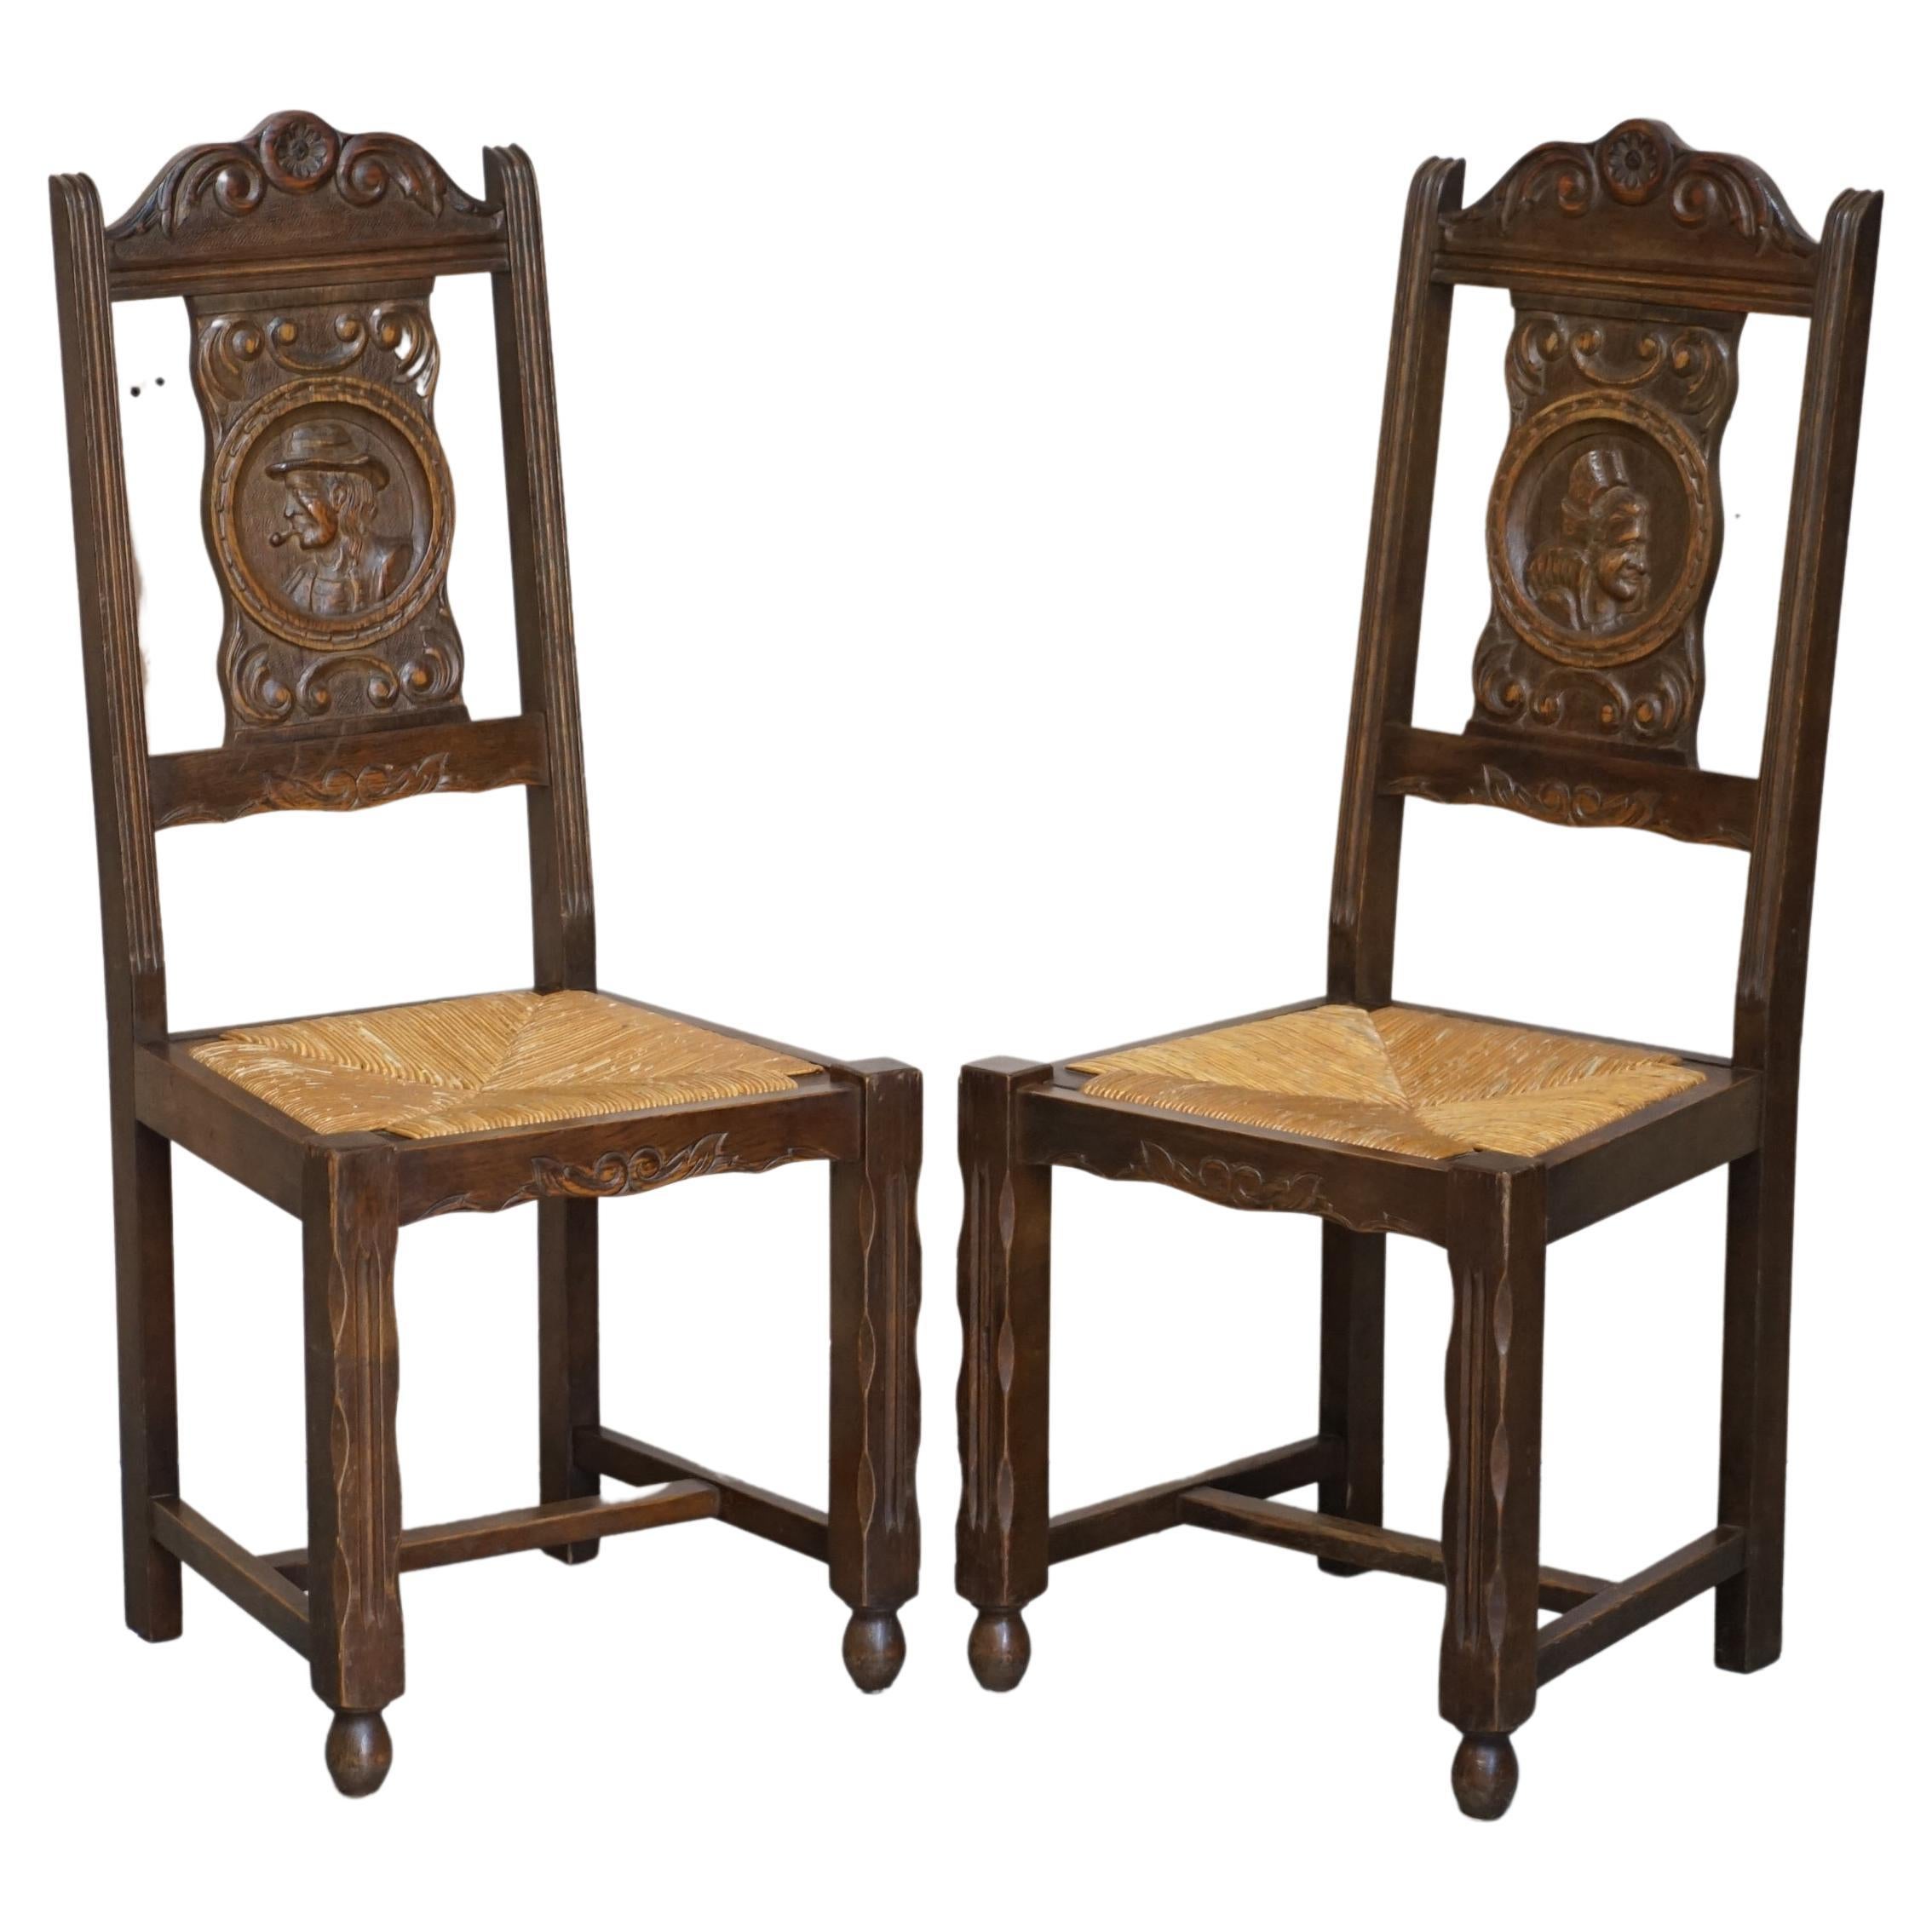 Stunning Pair of Antique circa 1920 Rush Seat Hand Carved Oak Brittany Chairs For Sale